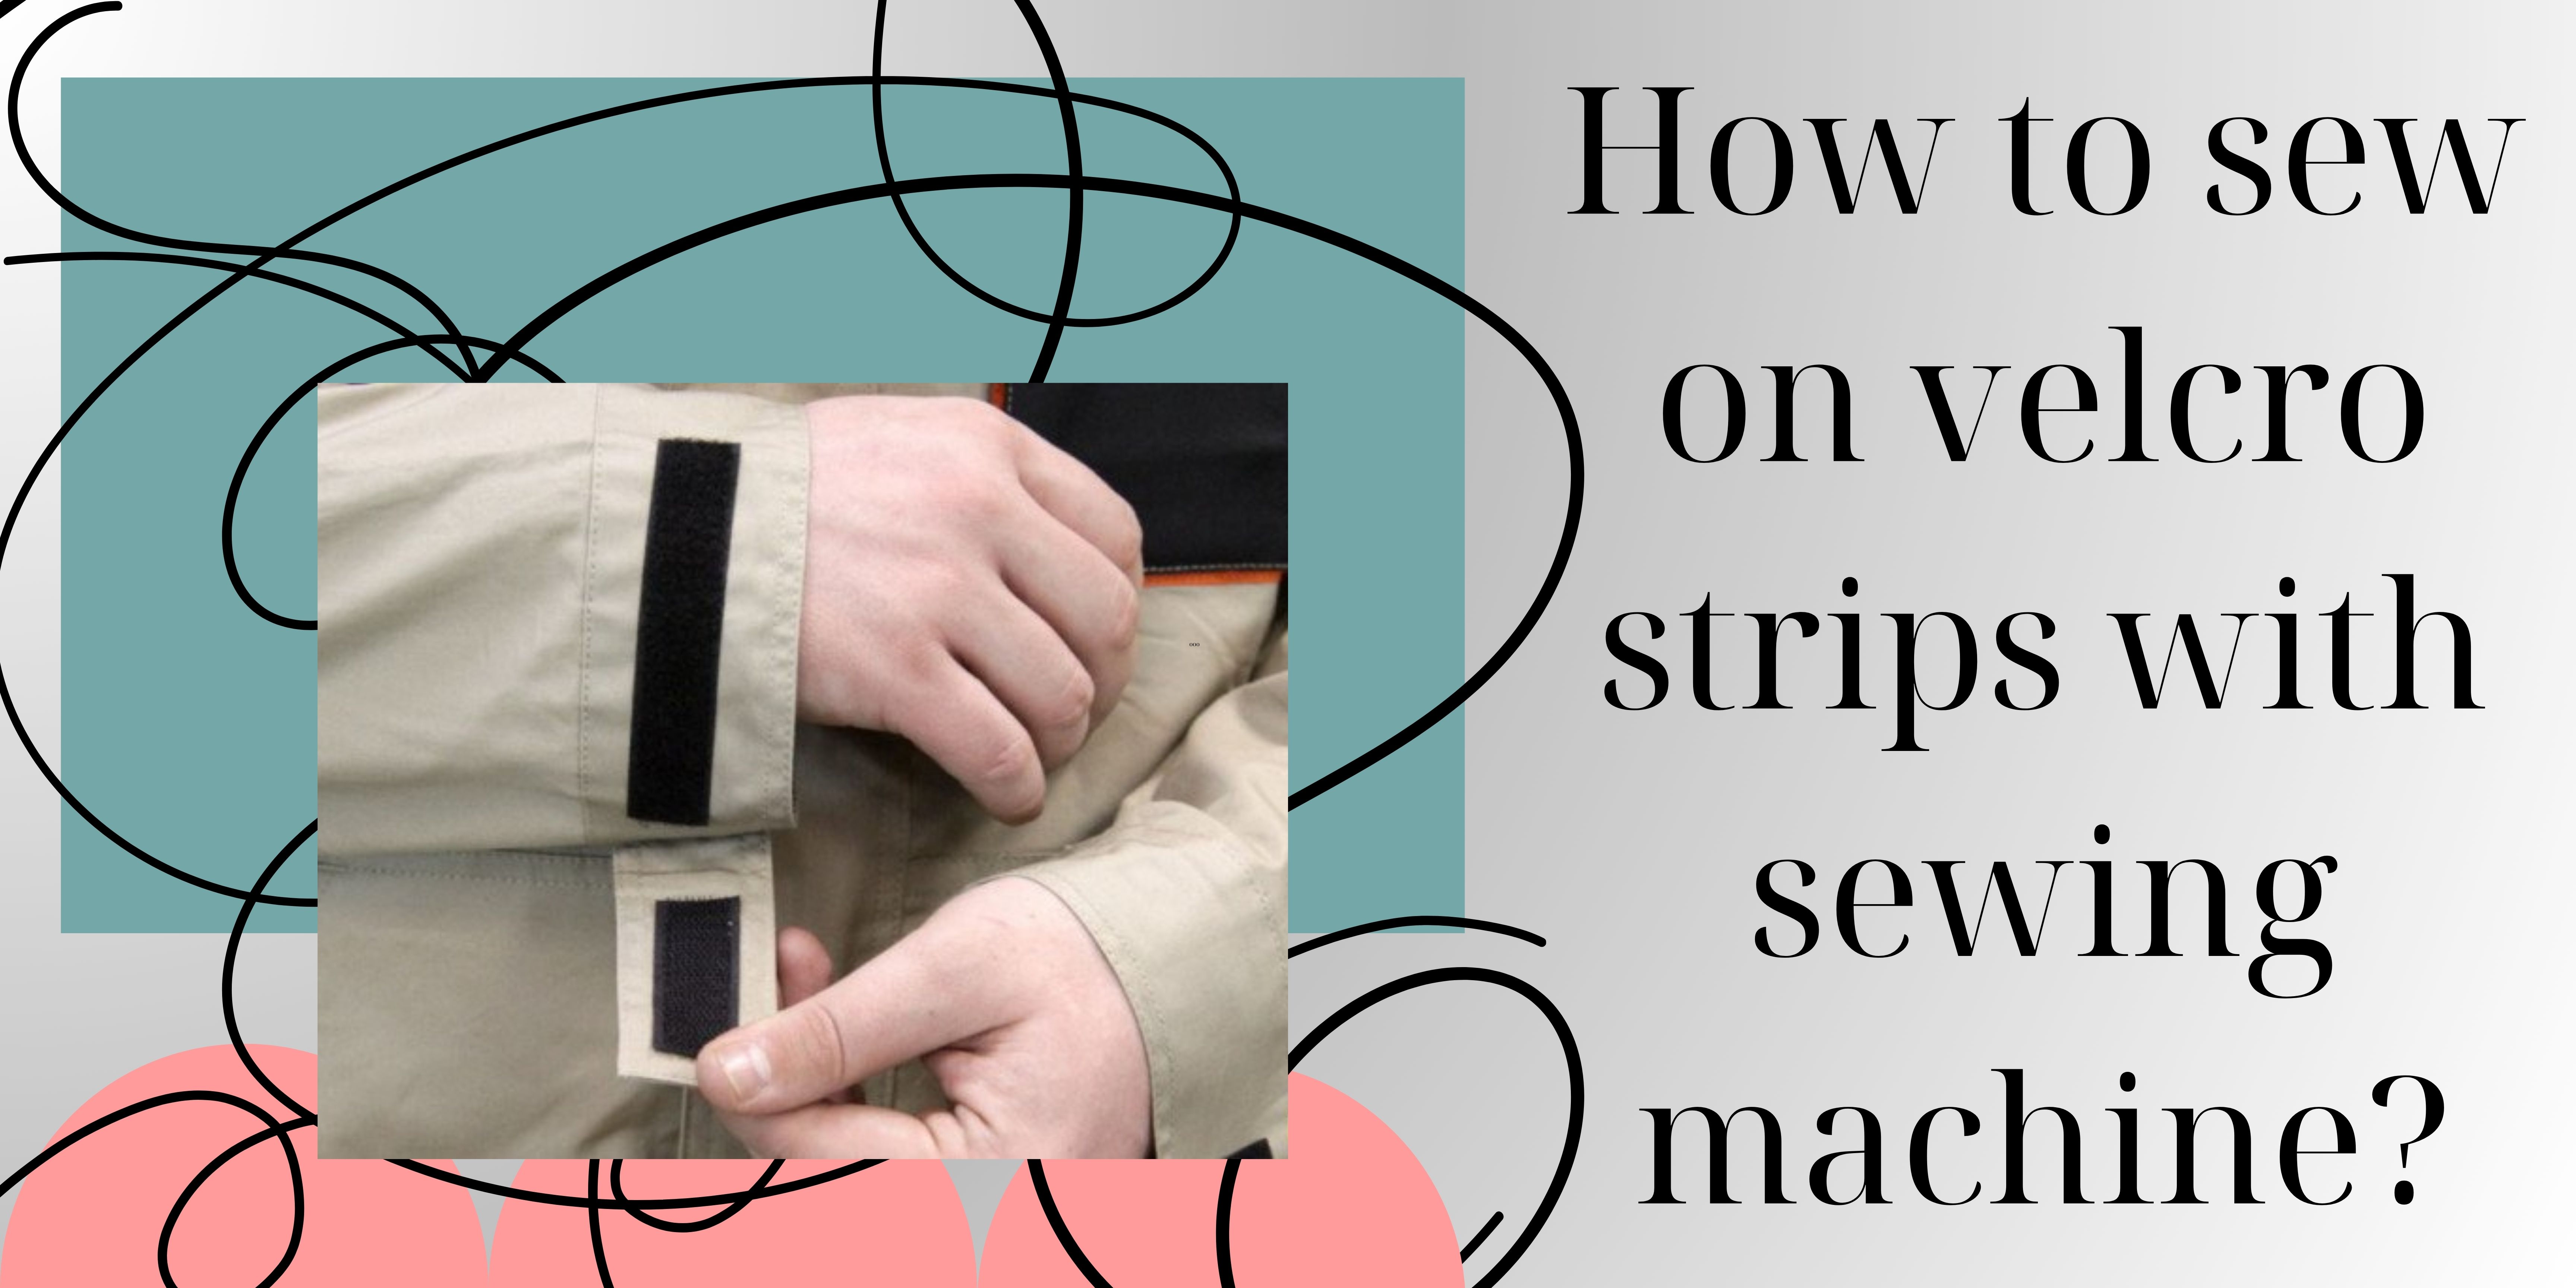 How To Sew On Velcro Strips With Sewing Machine?